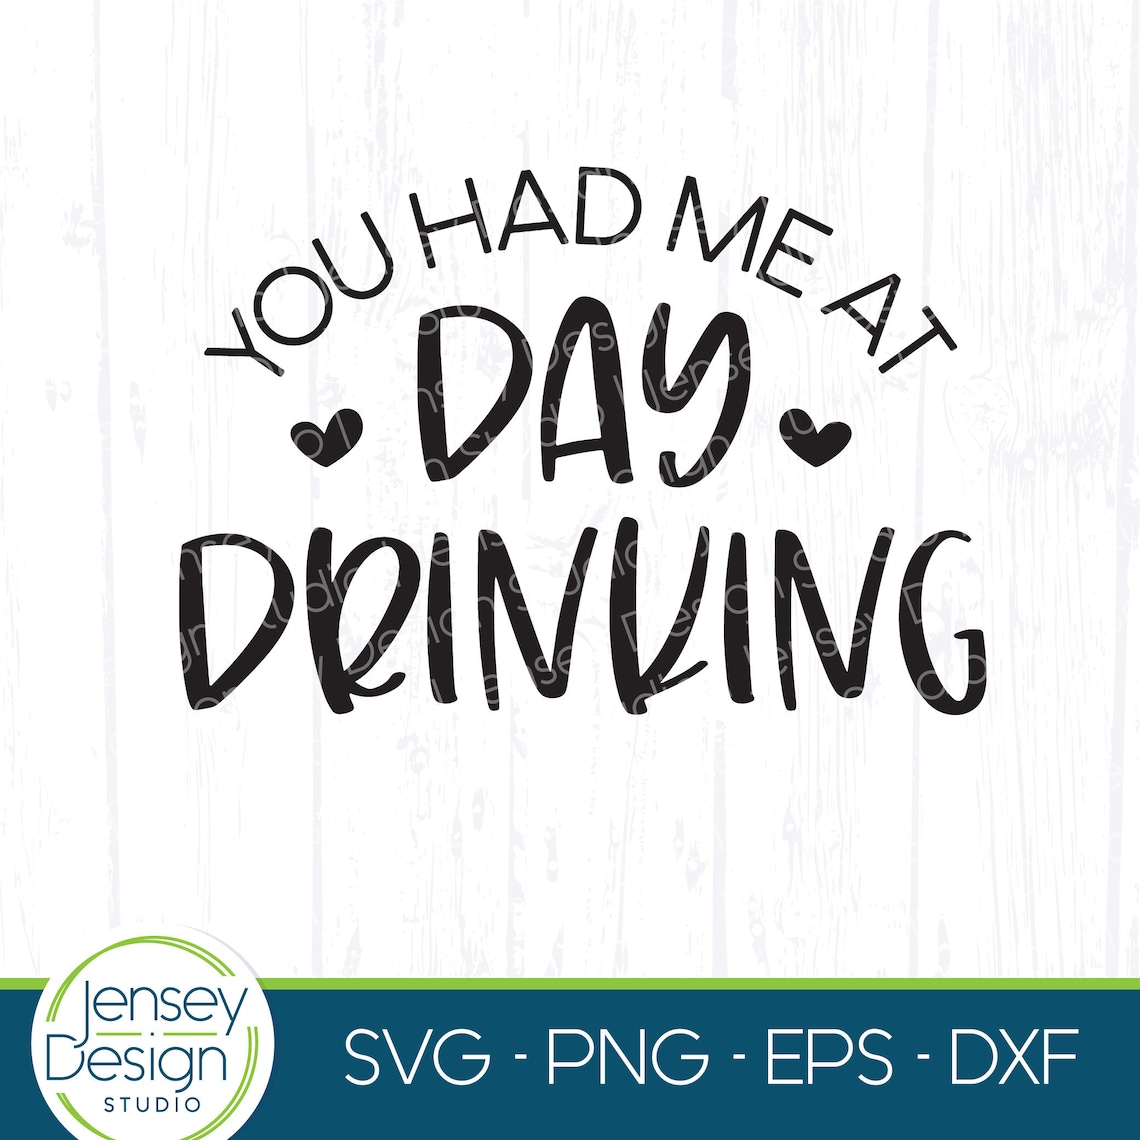 You Had Me At Day Drinking Svg Funny Alcohol Quote Adult Etsy